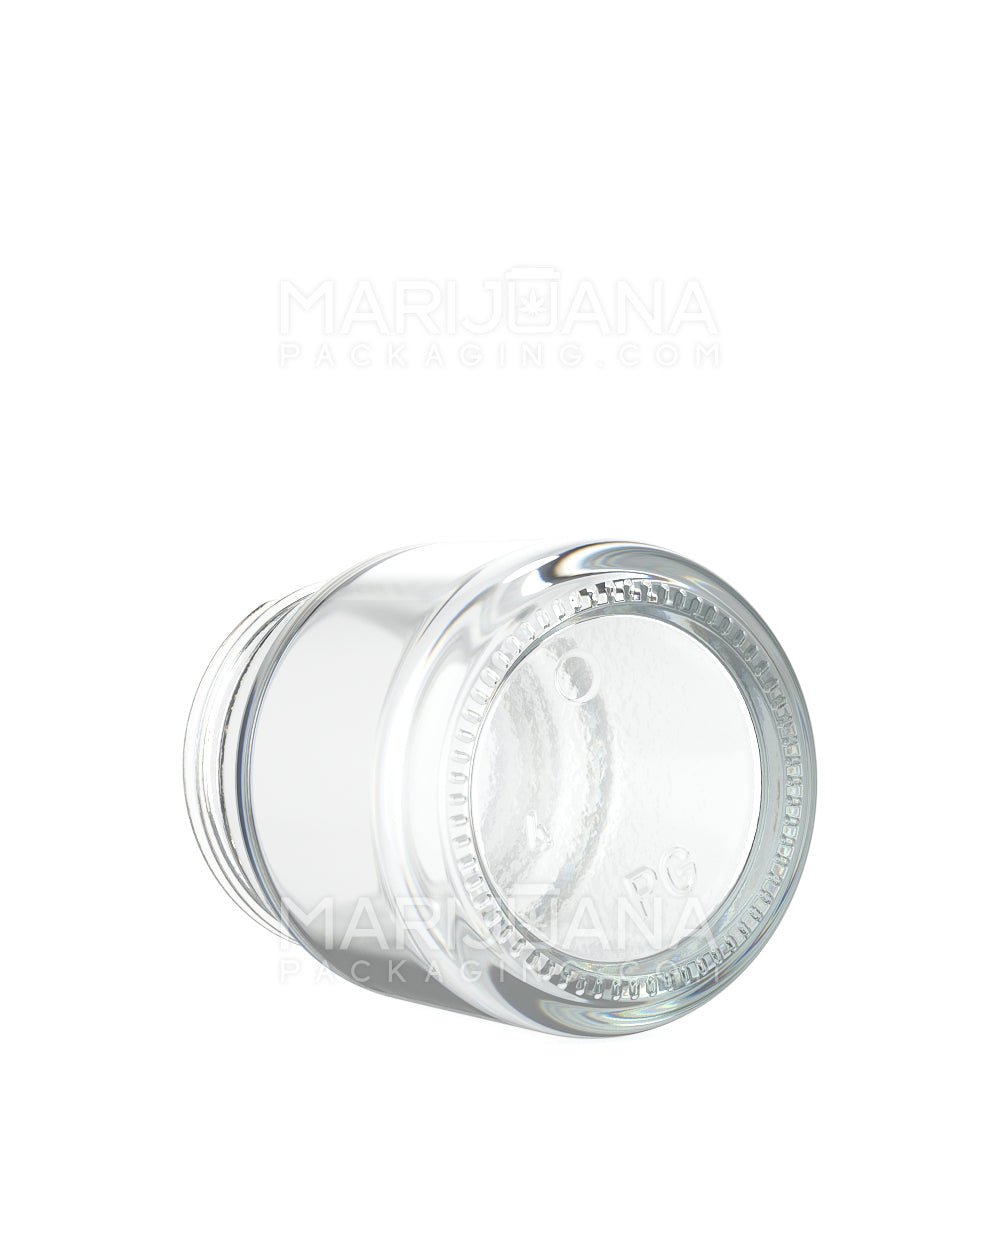 POLLEN GEAR | HiLine Straight Sided Clear Glass Jars | 45mm - 2.5oz - 72 Count - 4